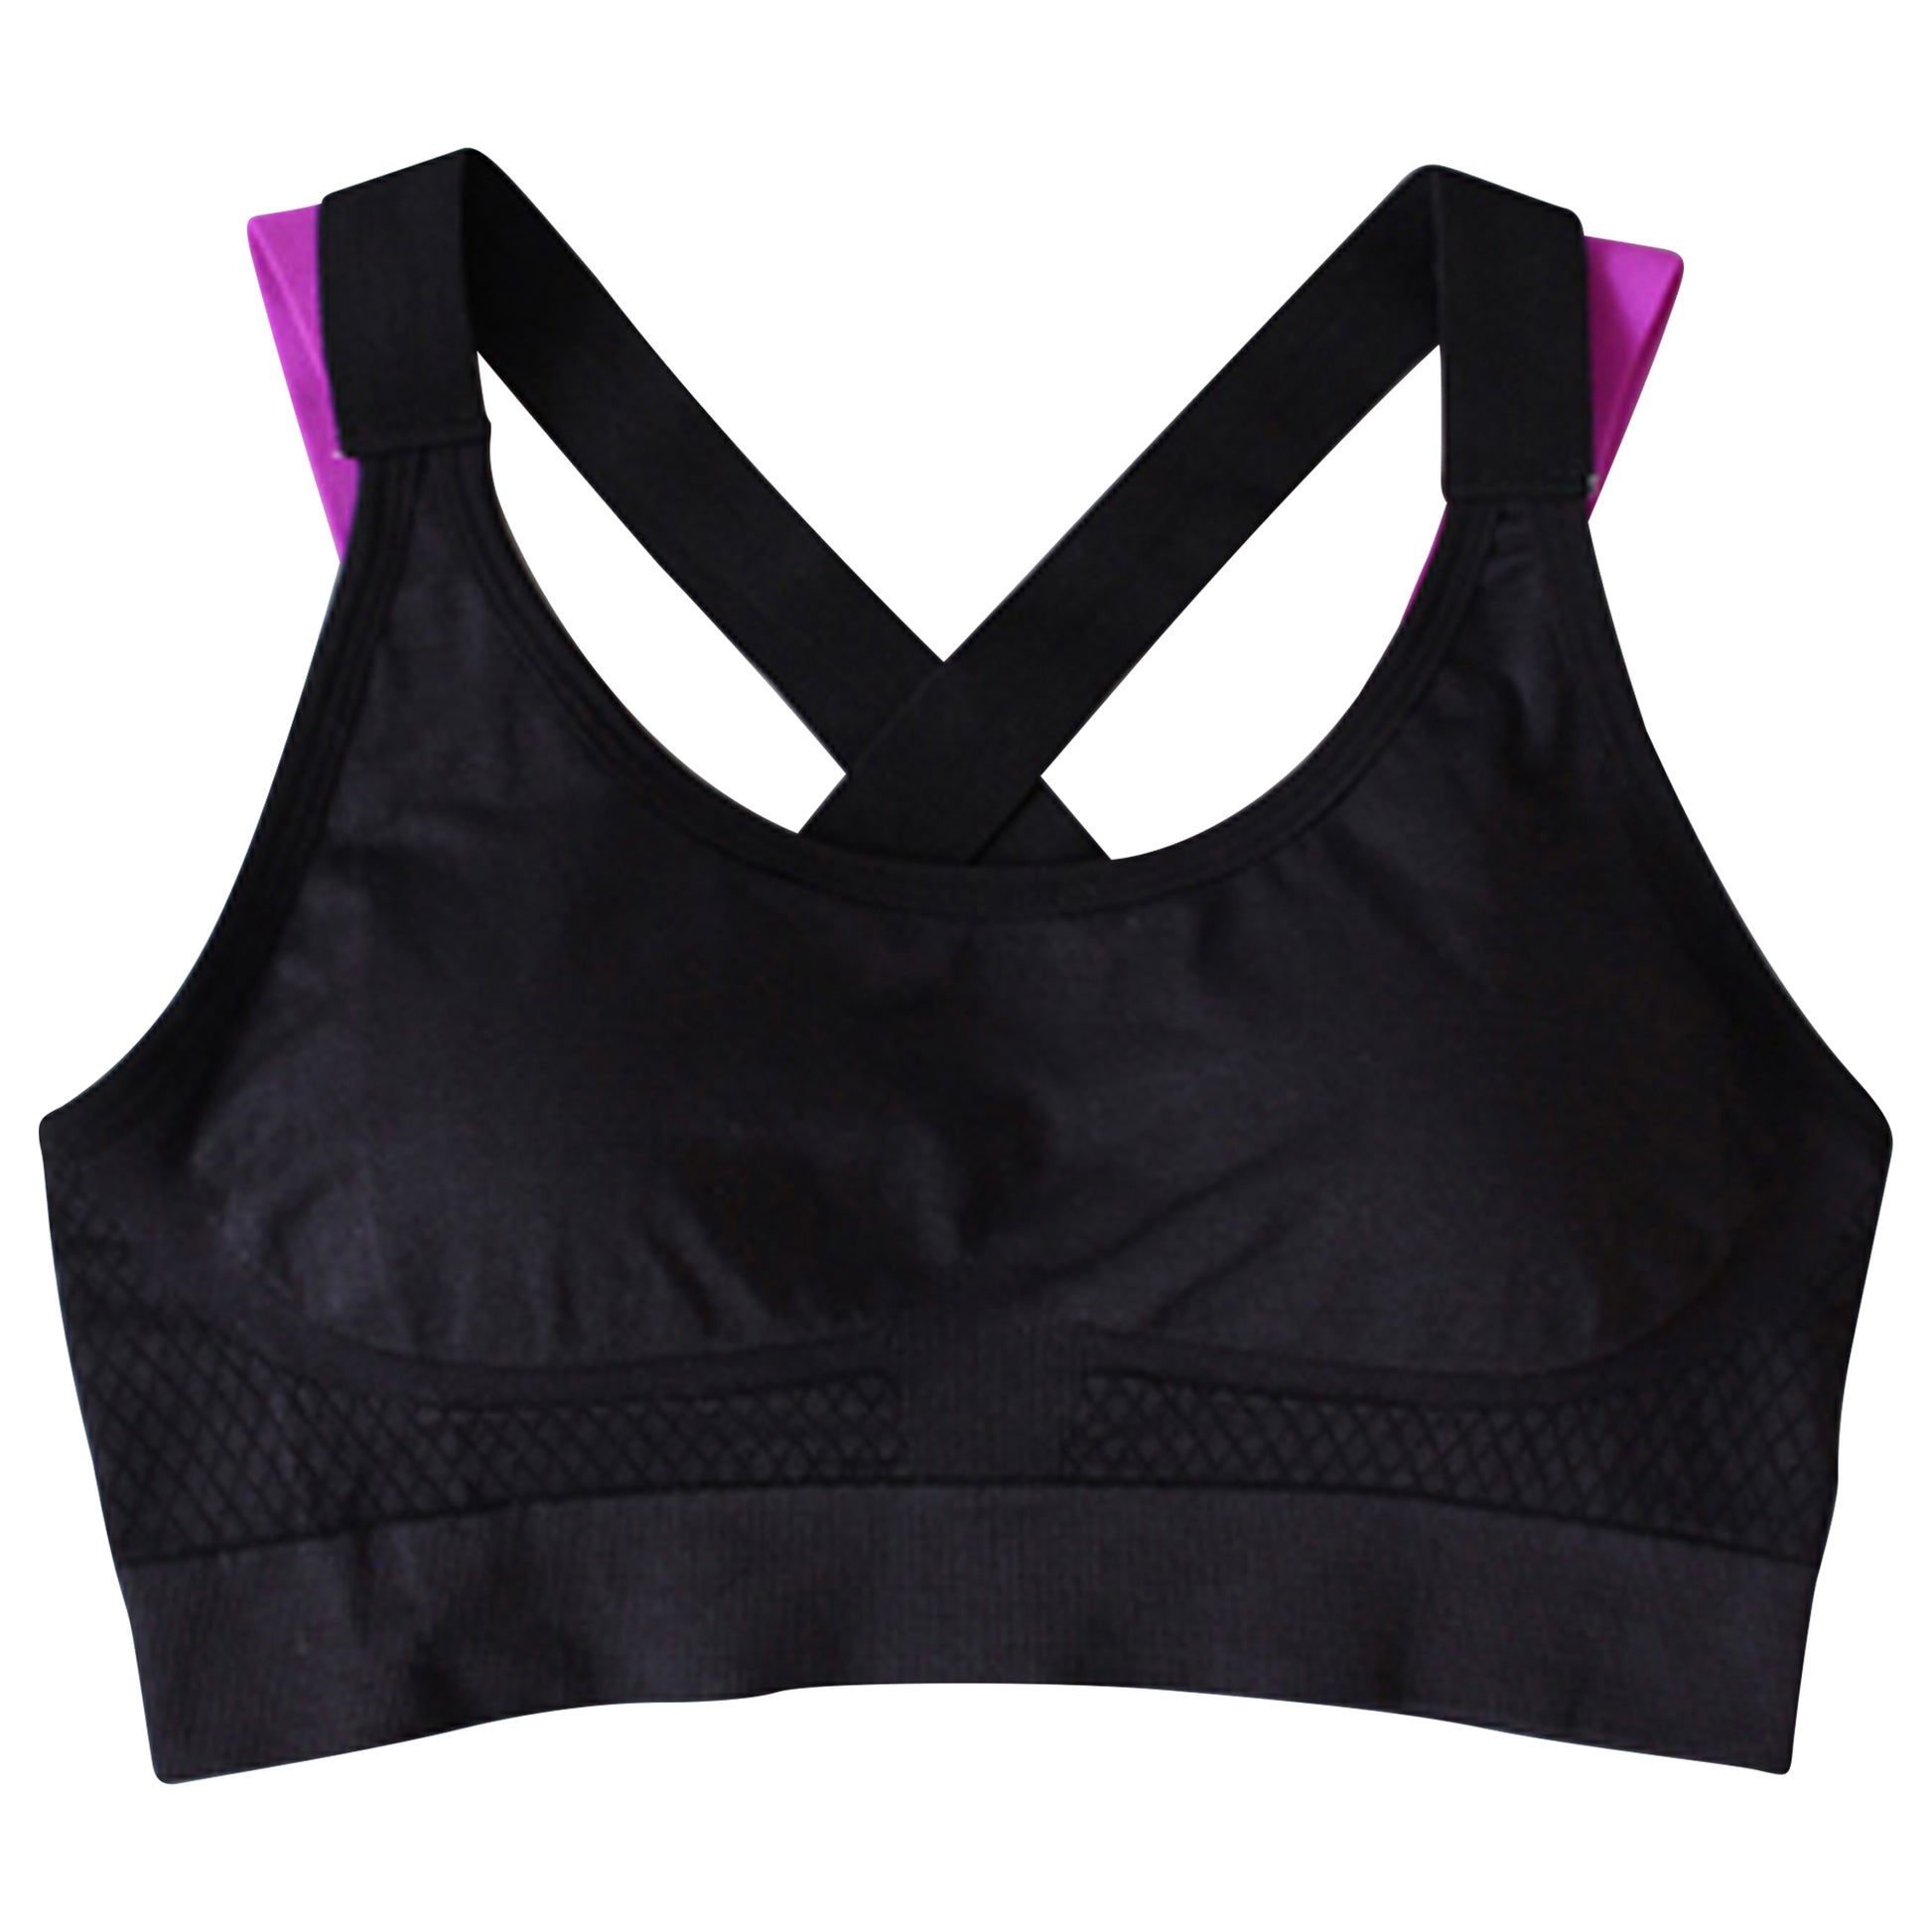 BENDON WOMEN'S EXTREME OUT TECHNICAL SUPPORT SPORTS BRA BLACK 34C